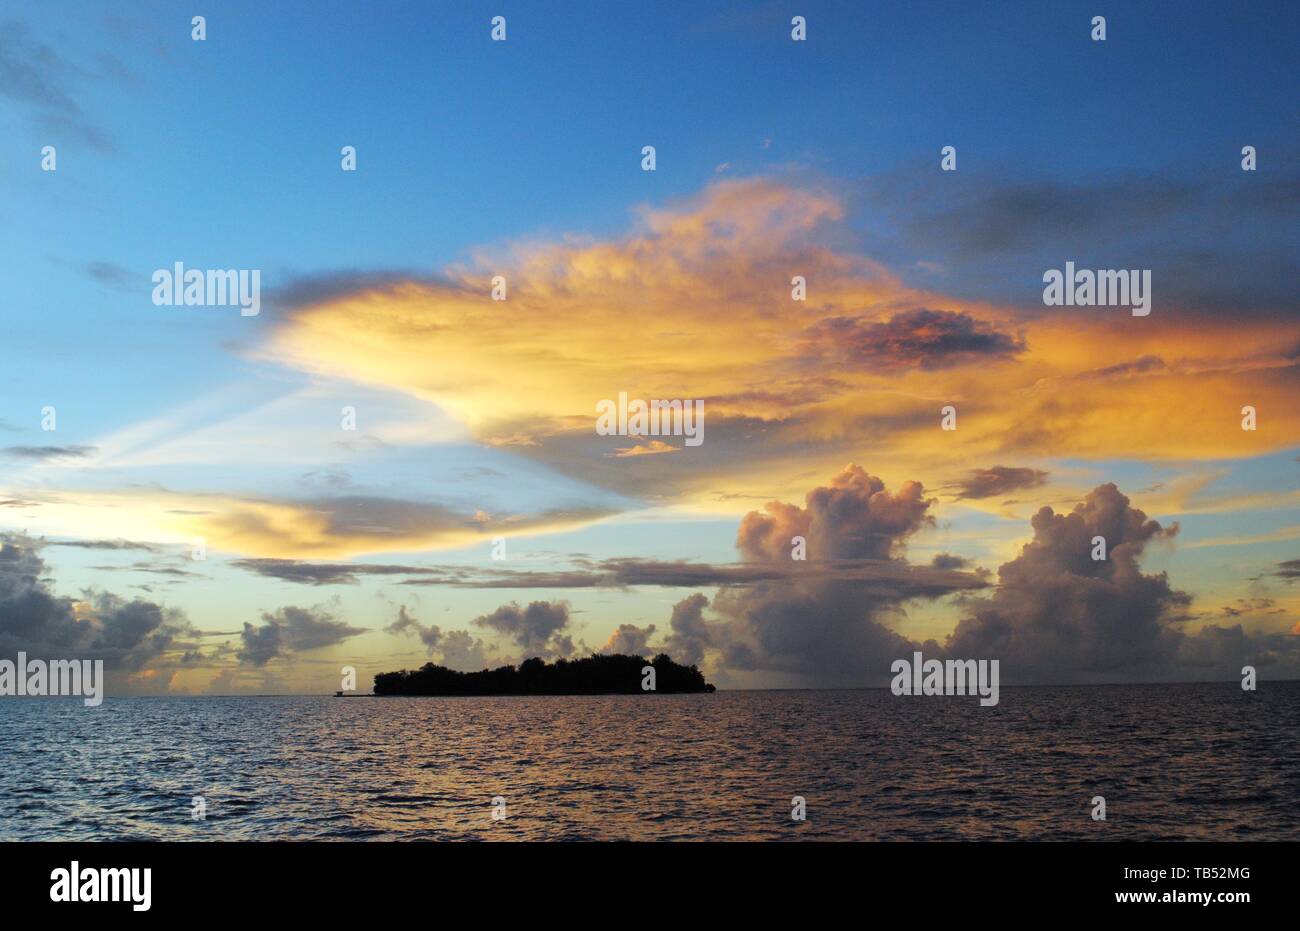 Magical play of clouds in the skies at sunset reflected in the waters of Saipan lagoon, with Managaha Island in view Stock Photo